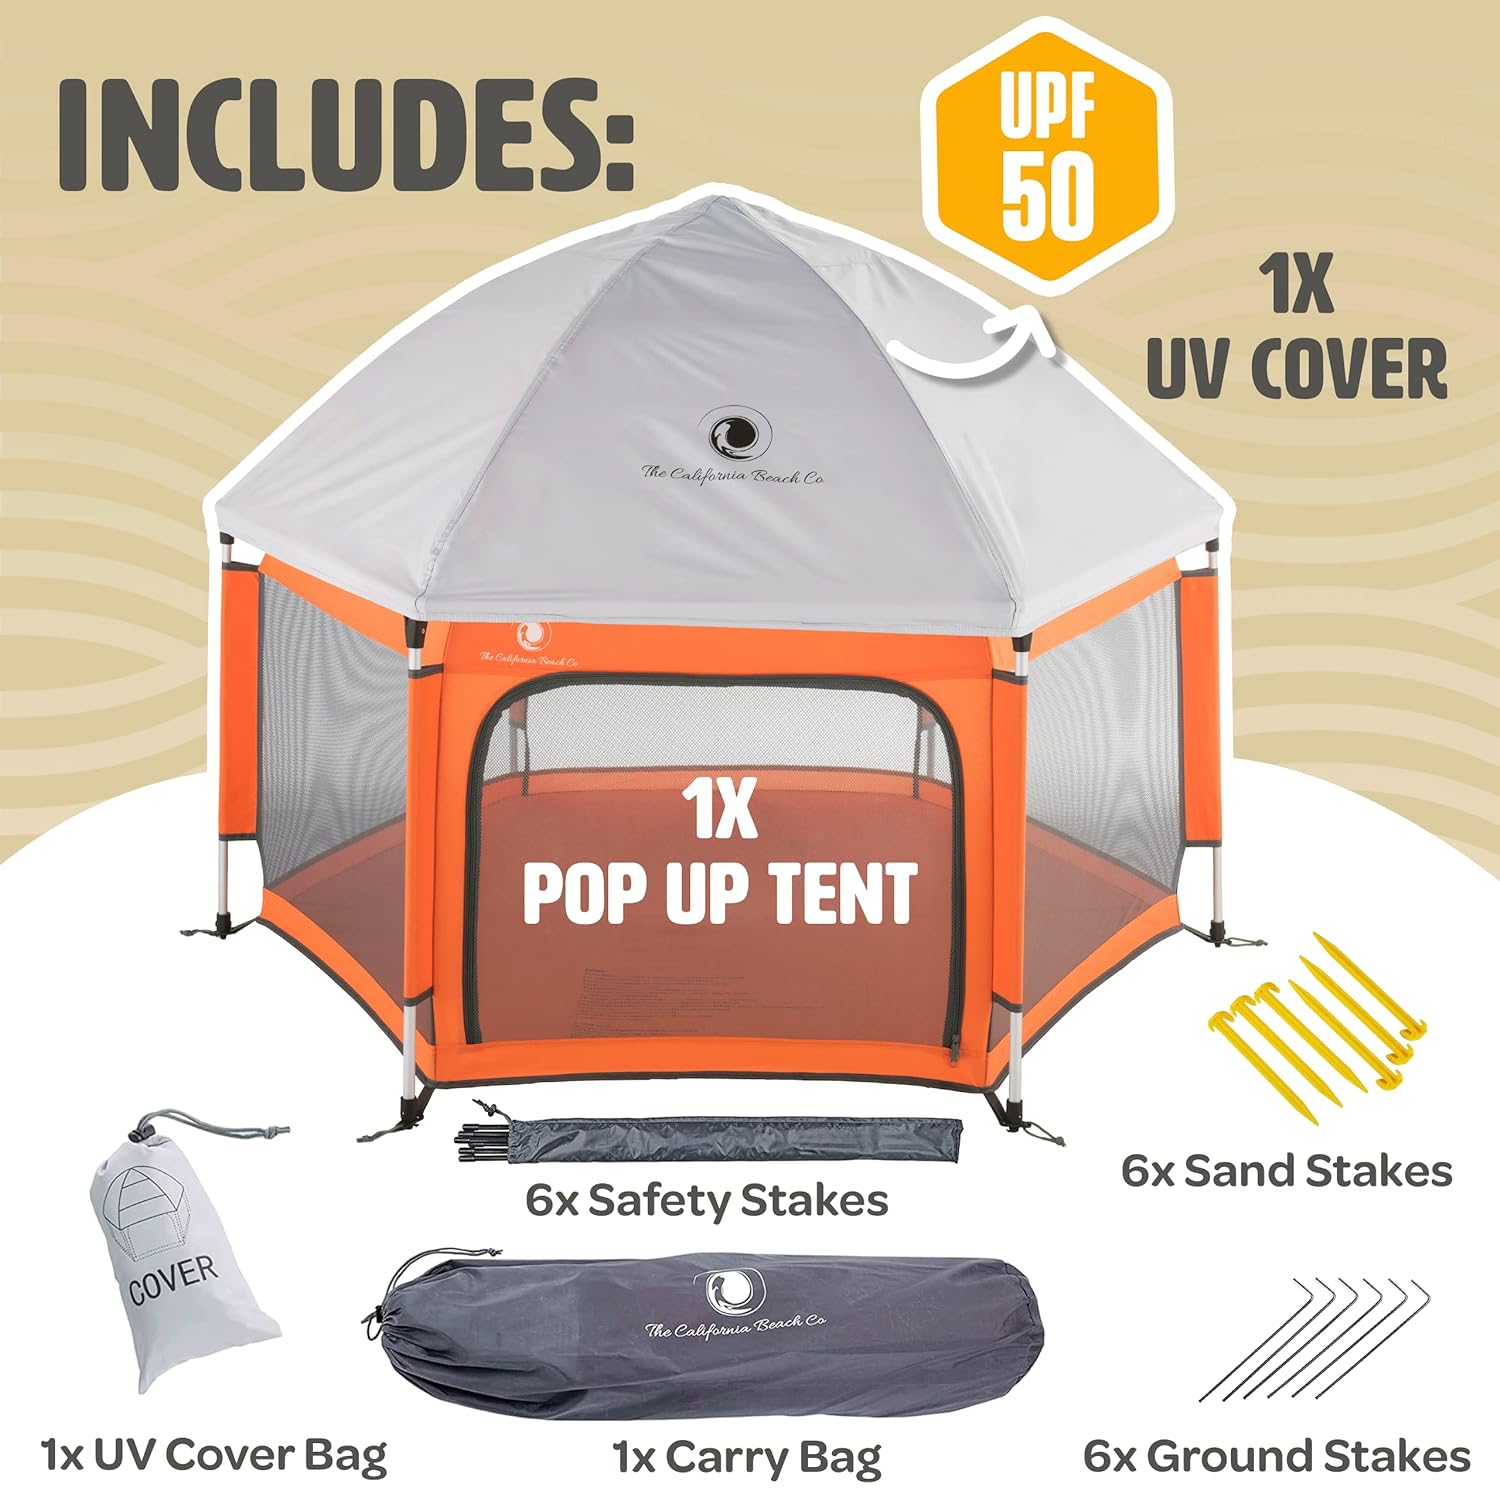 POP 'N GO Premium Outdoor and Indoor Baby Playpen - Portable, Lightweight, Pop Up Pack and Play Toddler Play Yard w/Canopy and Travel Bag - Orange - image 2 of 7